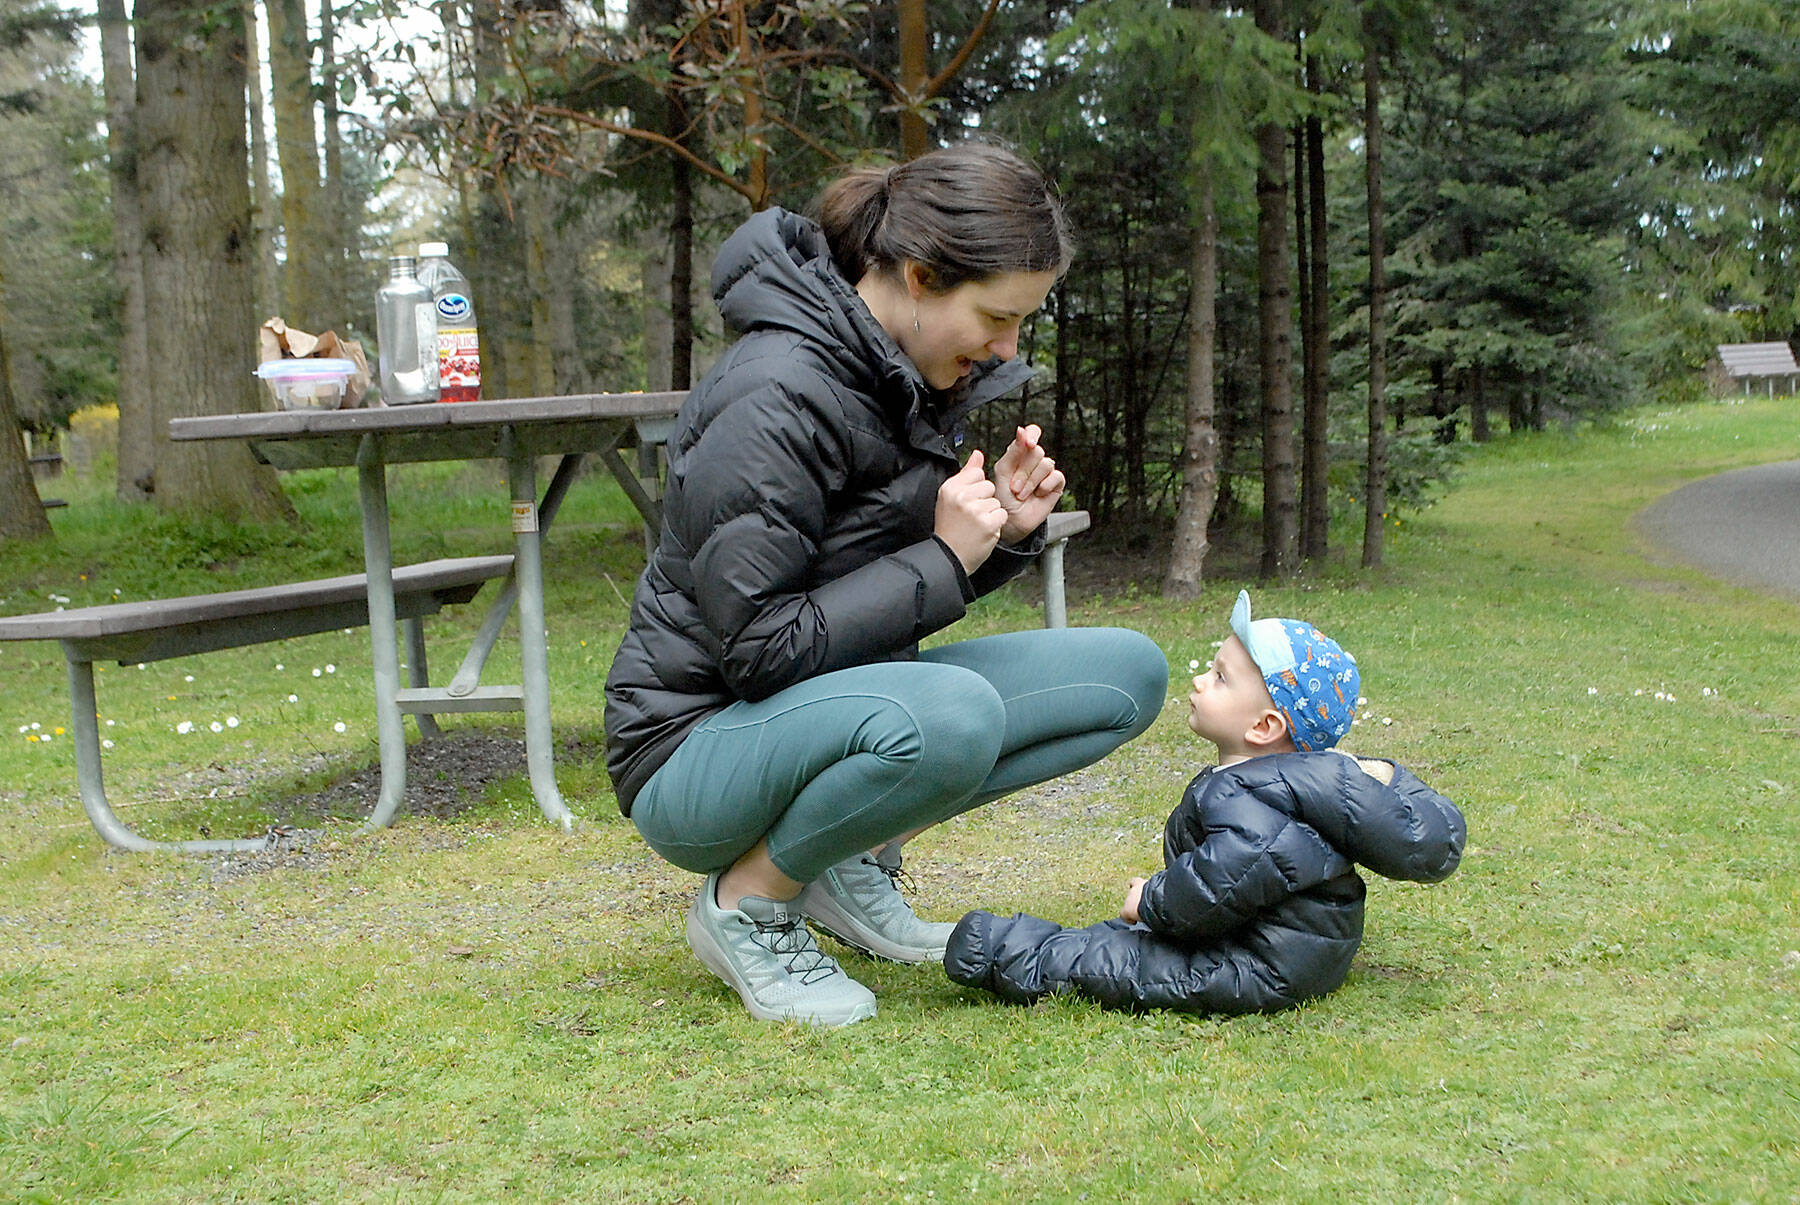 Anna Brady of Kingston shares a moment with her son, Owen, 9 months, after a picnic lunch at Robin Hill Farm County Park west of Sequim over the weekend. The lunch was a prelude to a family bike ride on the Olympic Discovery Trail. (Keith Thorpe/Peninsula Daily News)